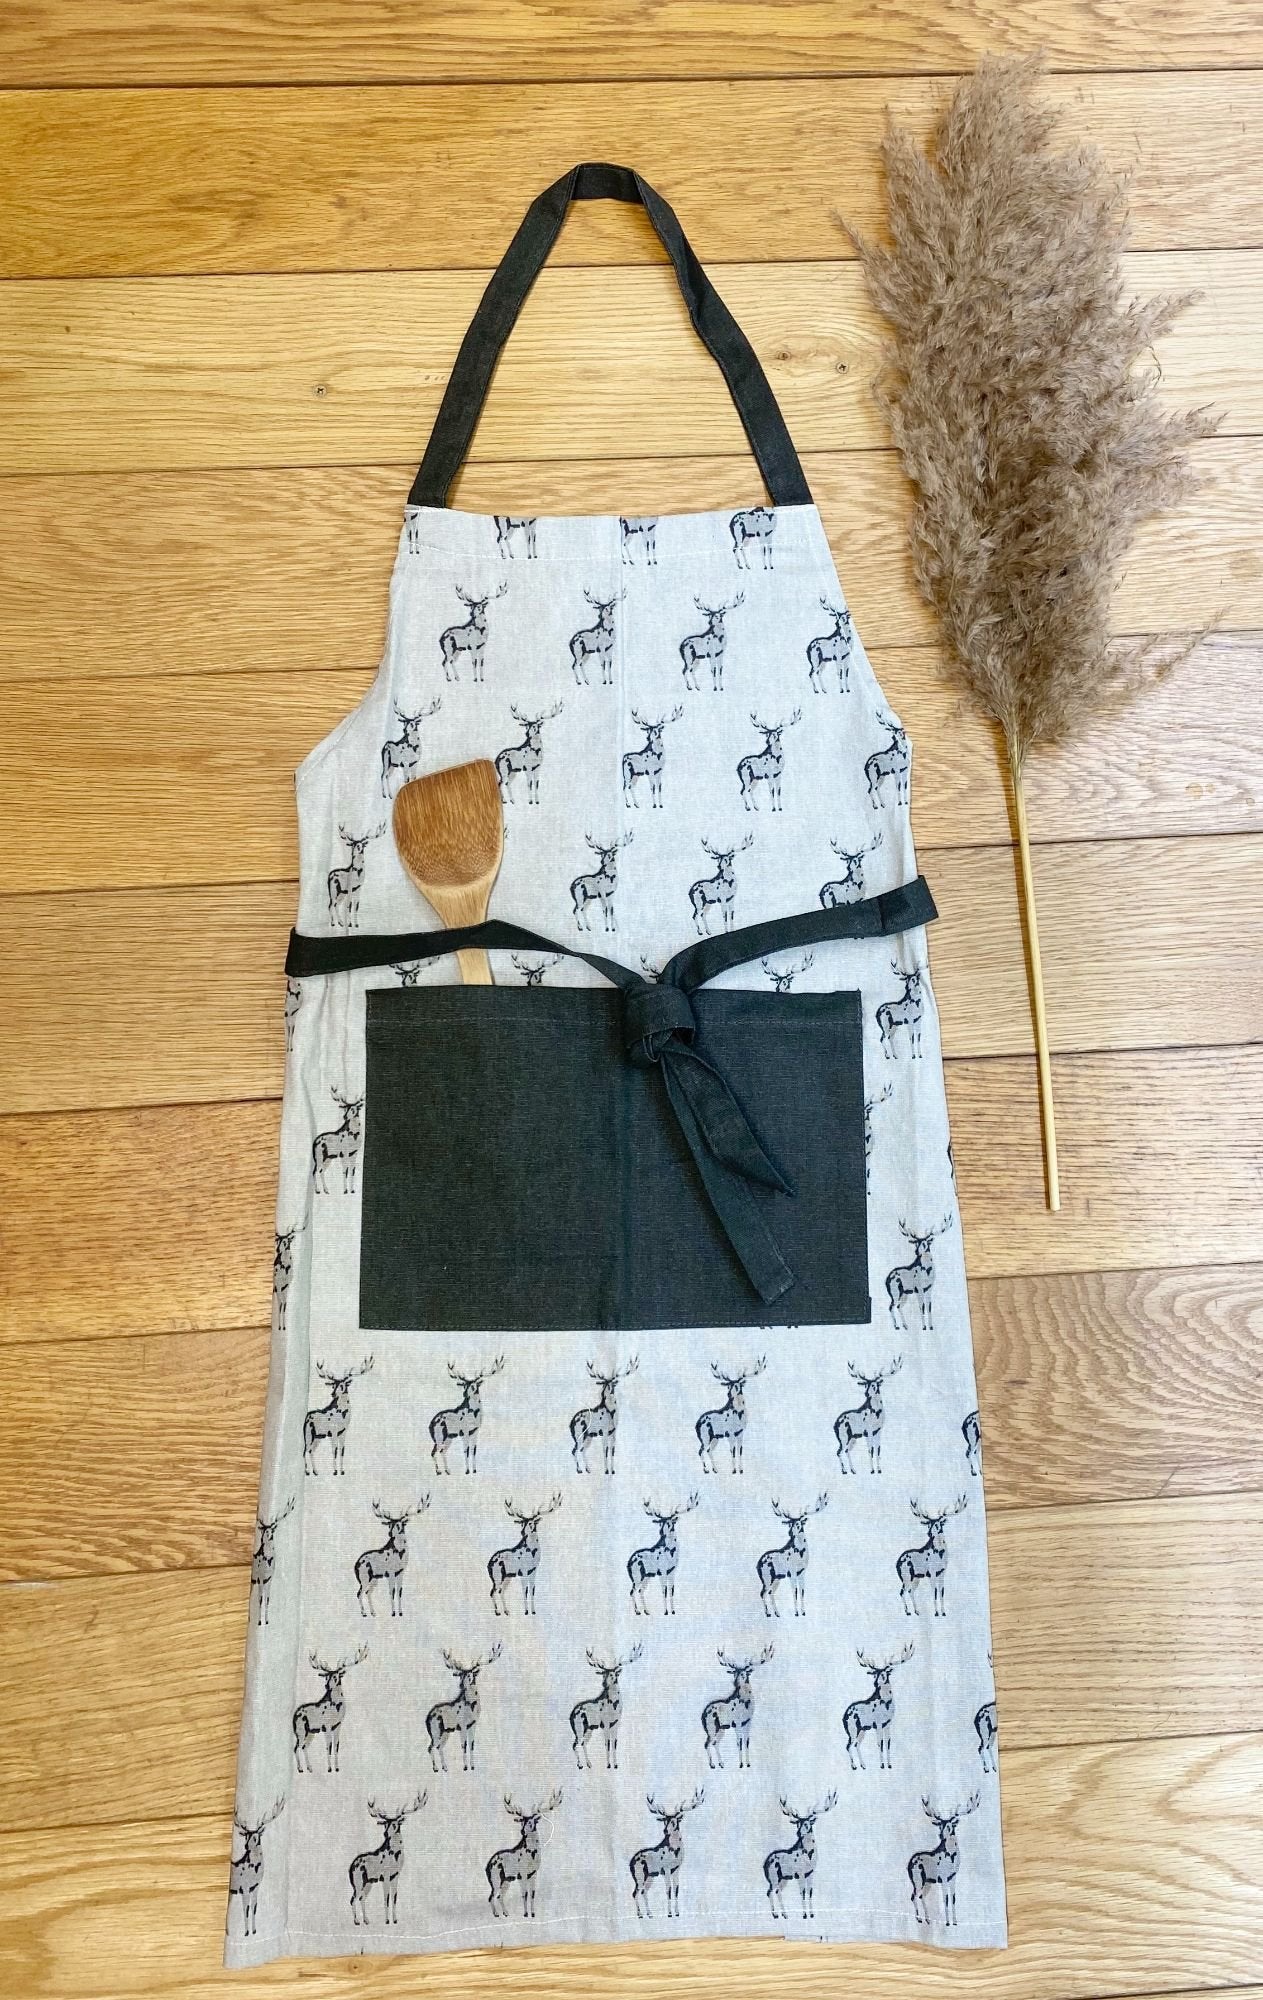 Grey Kitchen Apron With Stag Print Design